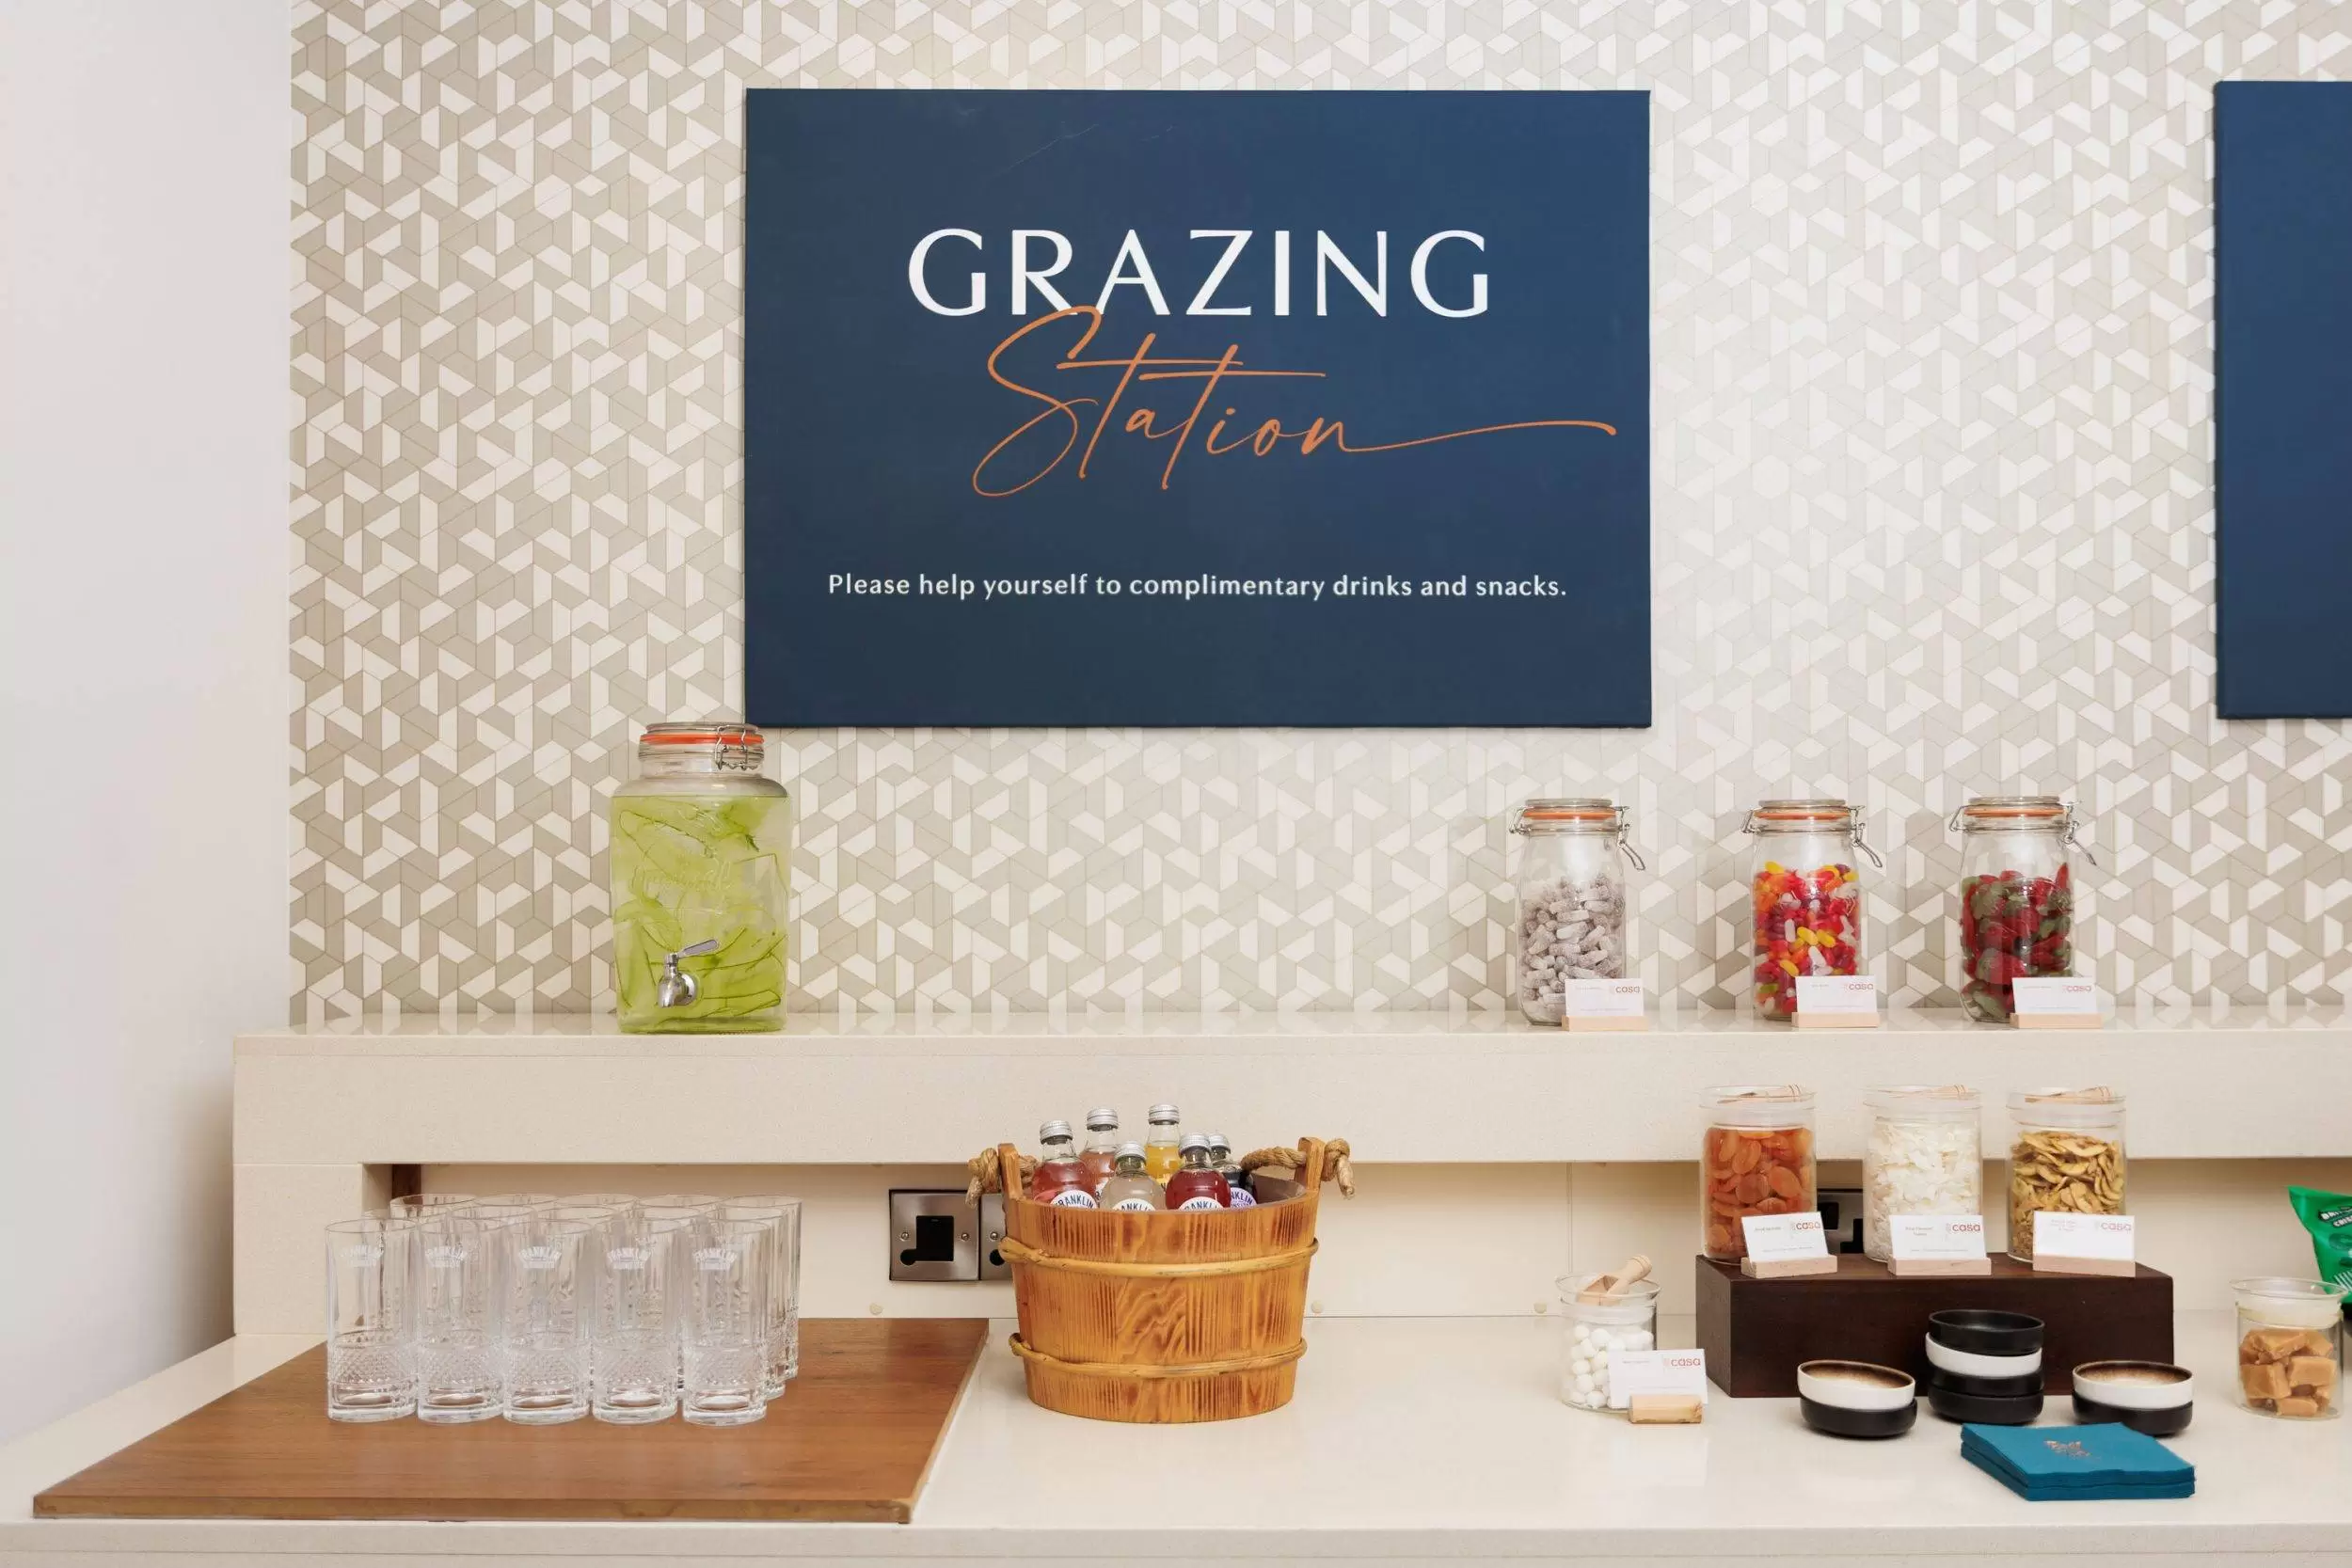 Training day grazing station, luxury large meeting room facilities